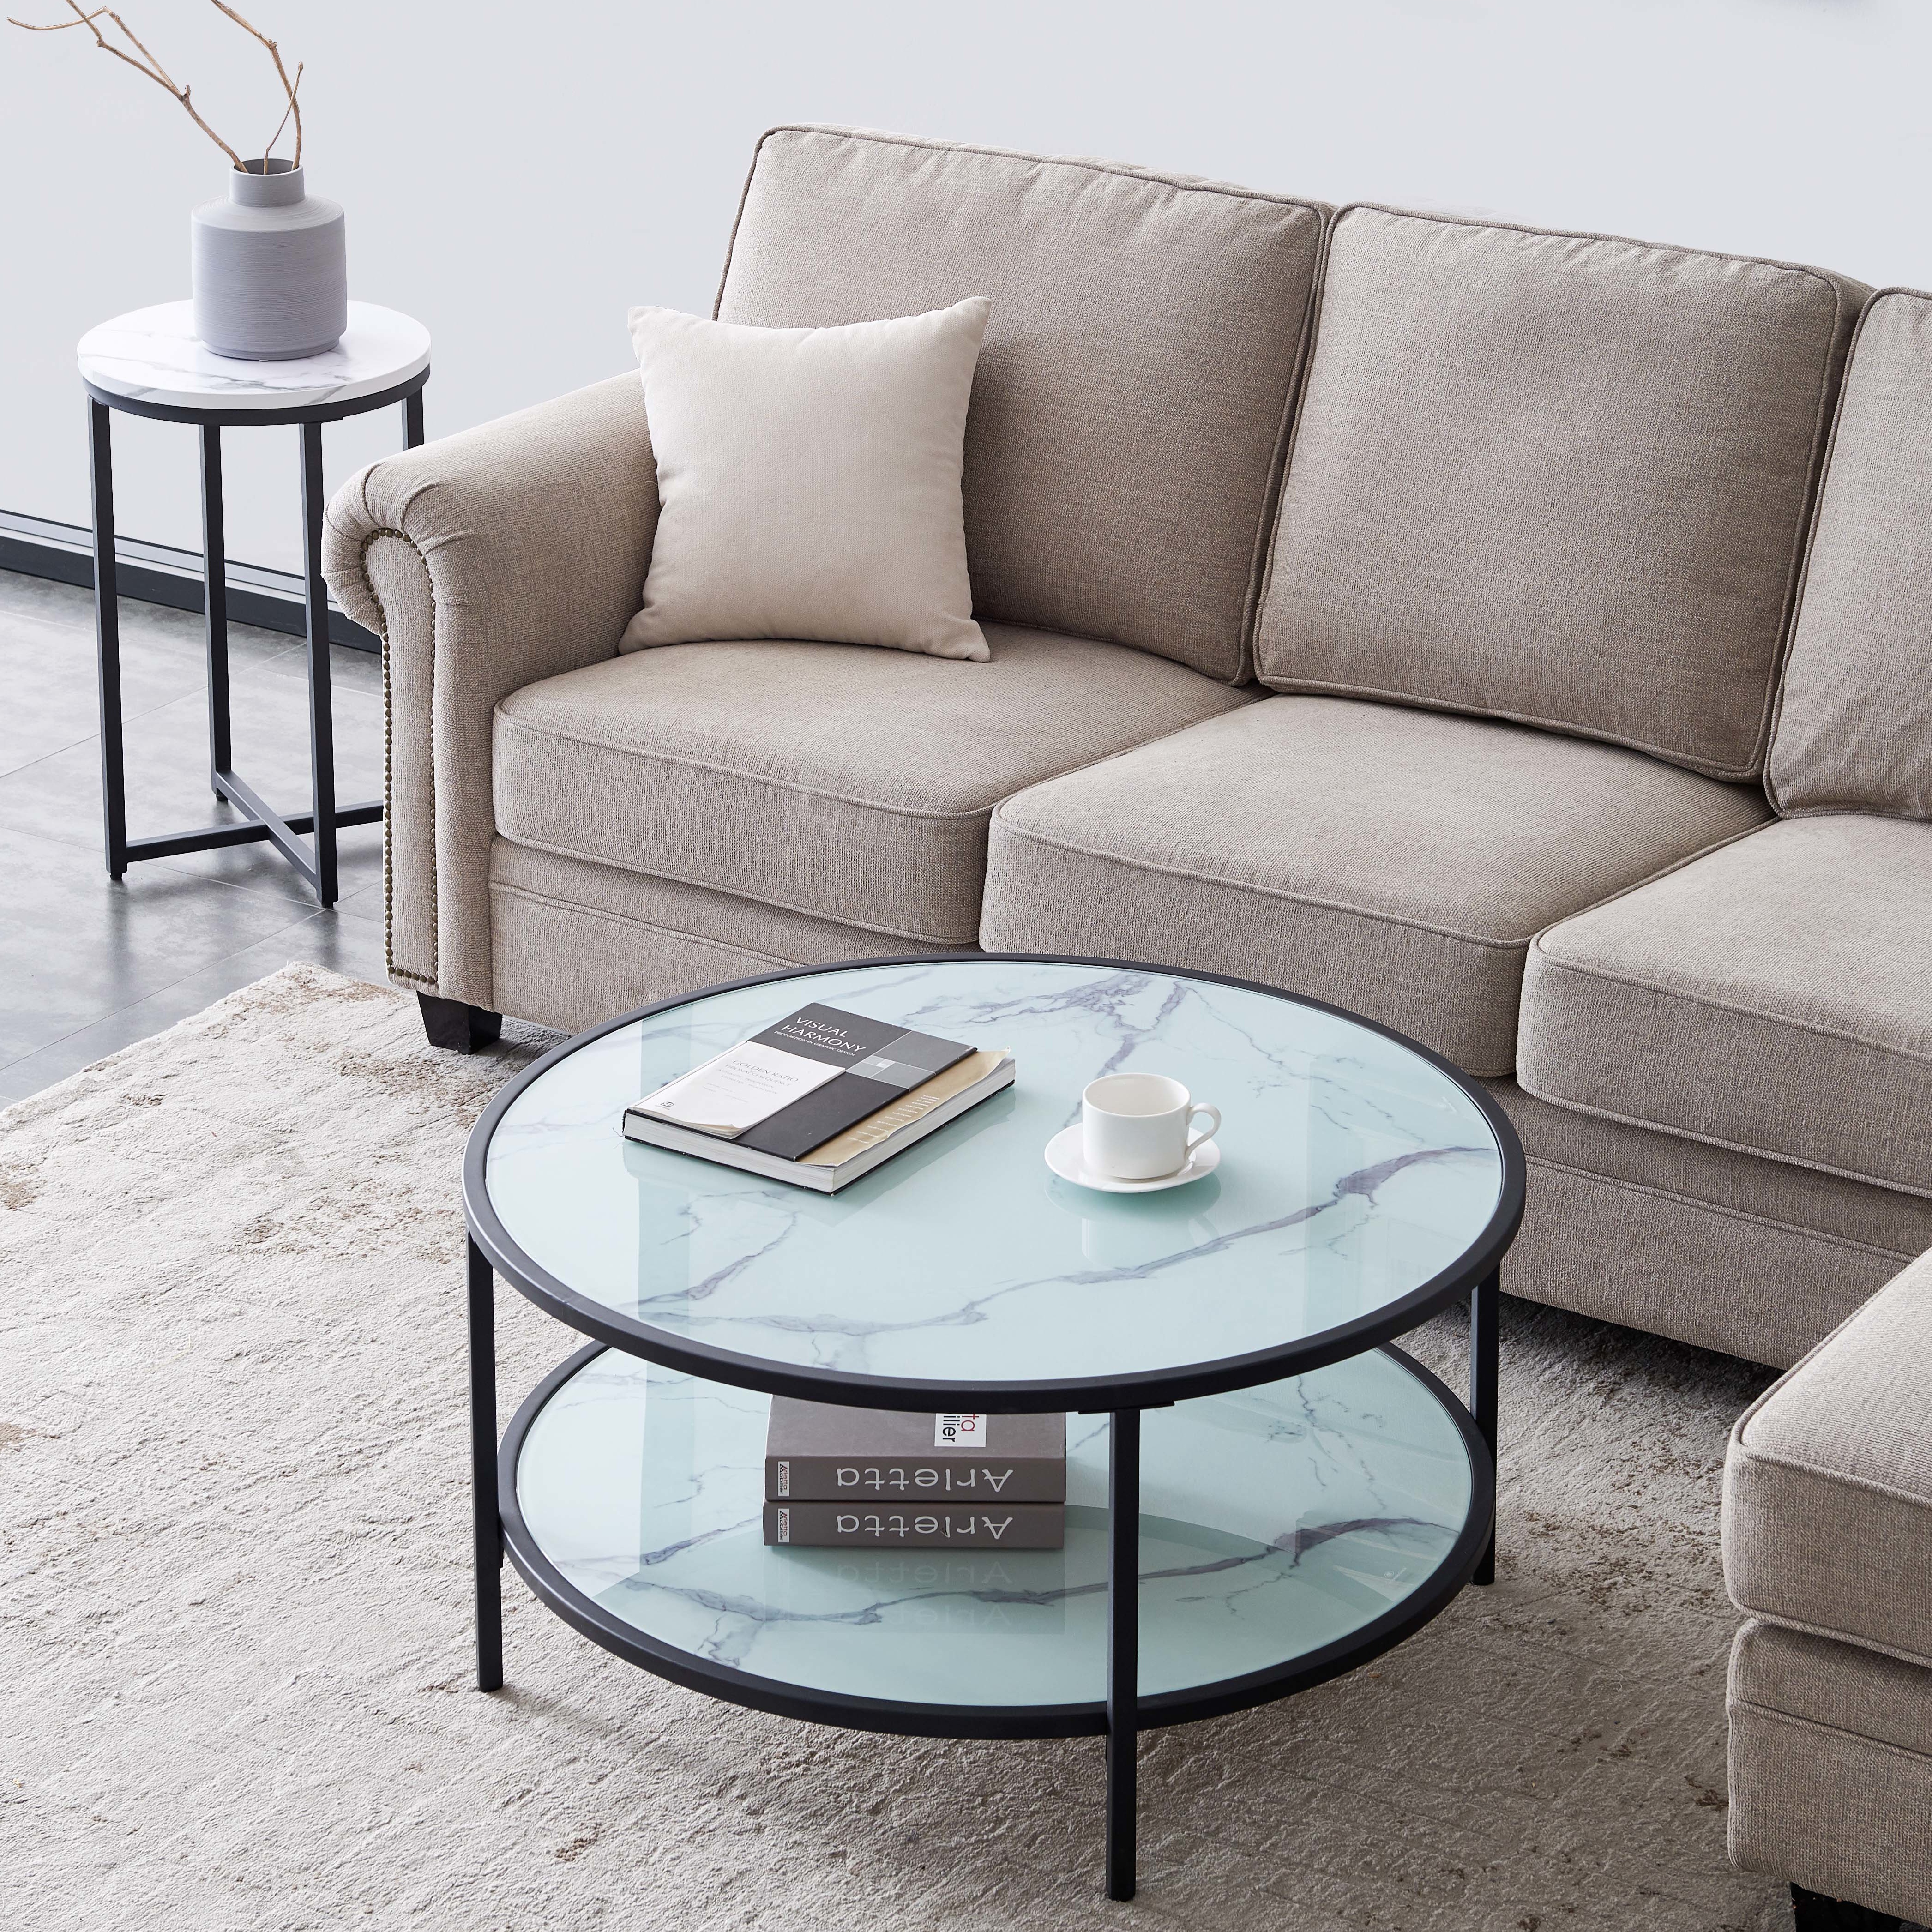 Glass coffee table with large storage space-CASAINC